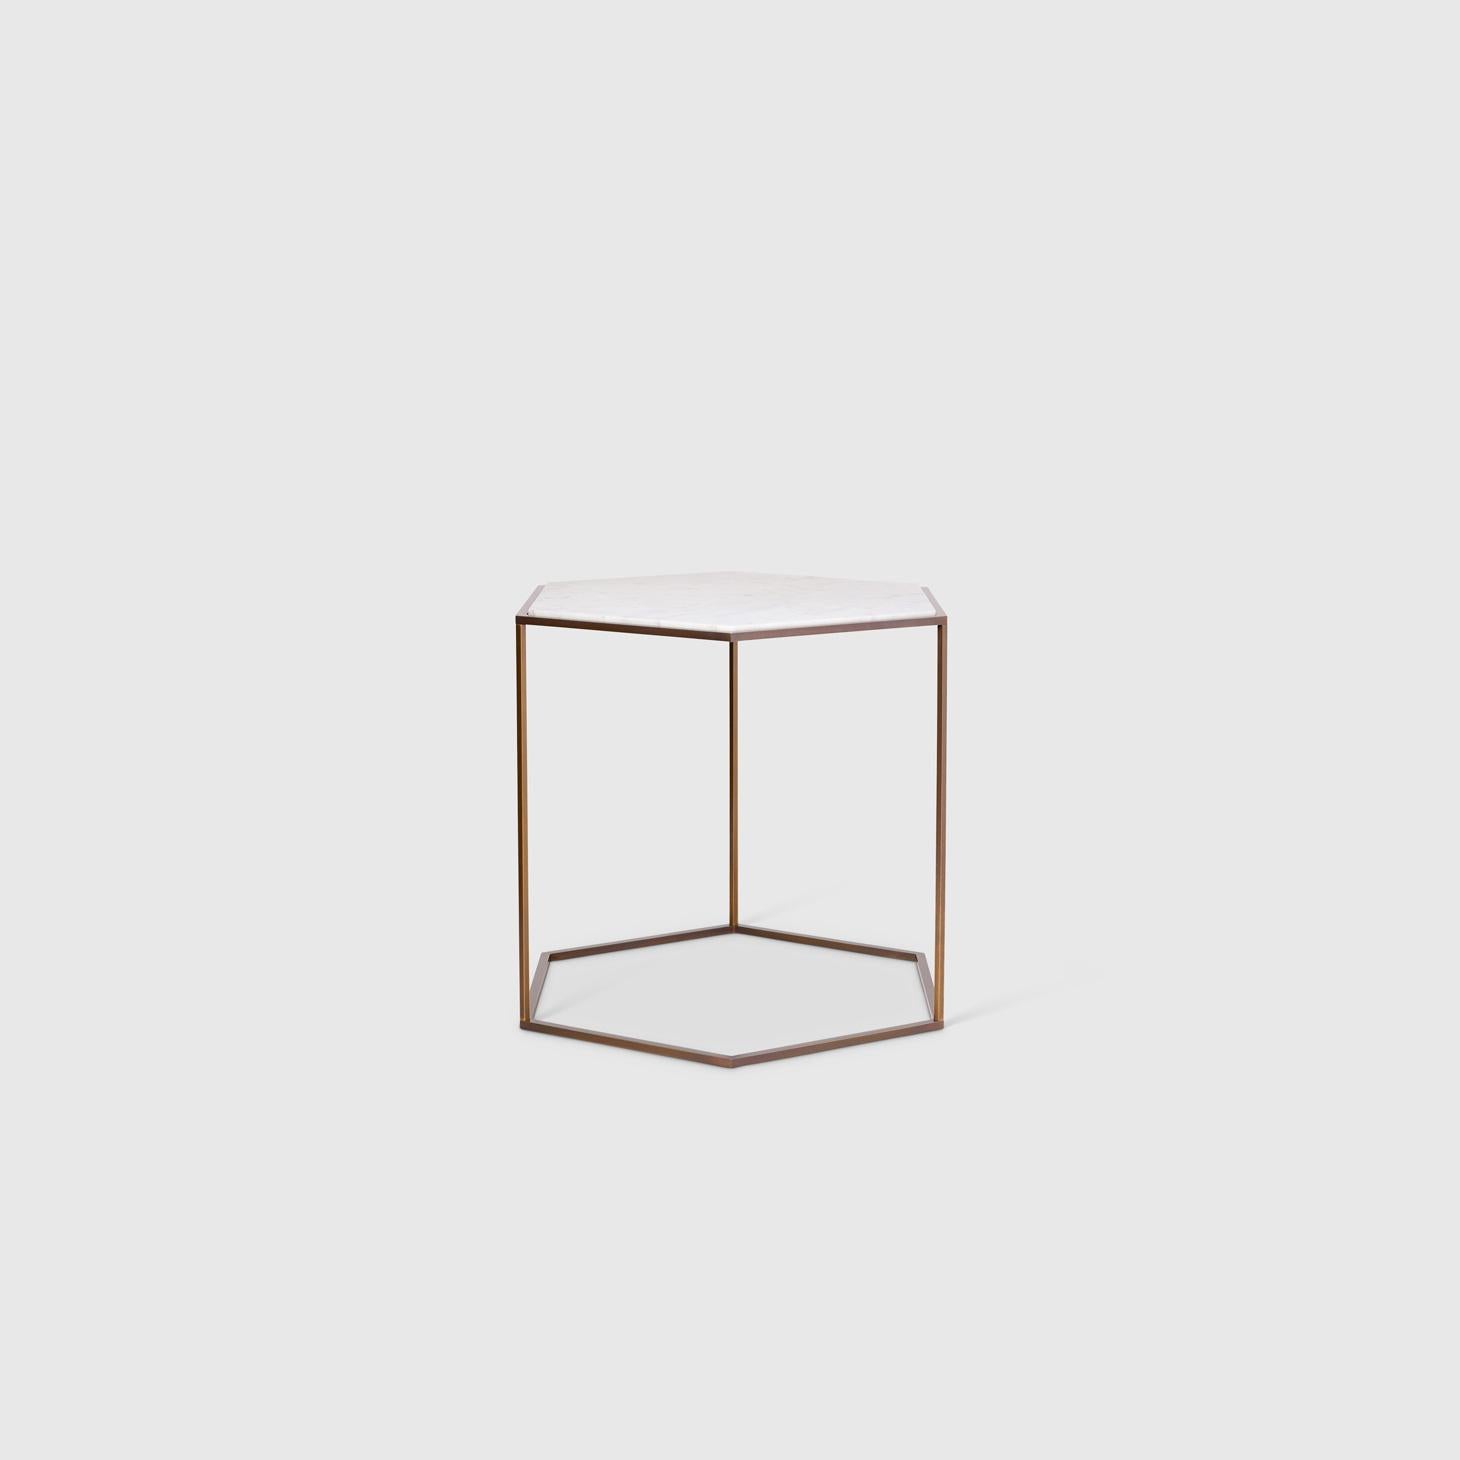 The Nob Hill side tables by Yabu Pushelberg mirror the topography of the area known for a commanding view over San Francisco. The table available in three sizes also comes in two finish pairings; smoked brass with a Carrara marble top and smoked